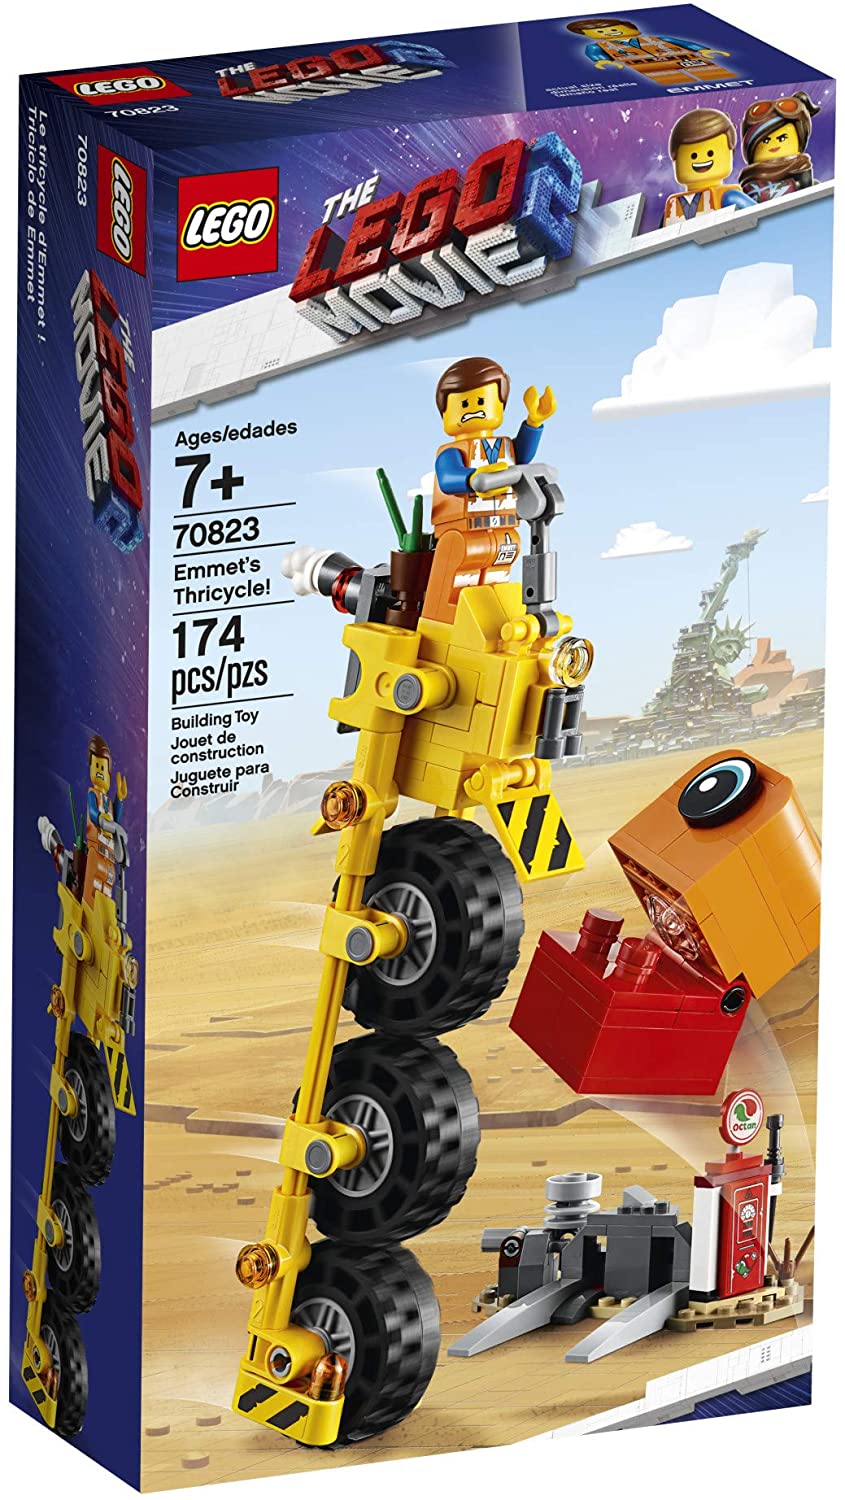 LEGO Aged 7 Plus The LEGO Movie 2 Emmets Thricycle Toy Of 174 Piece Sets